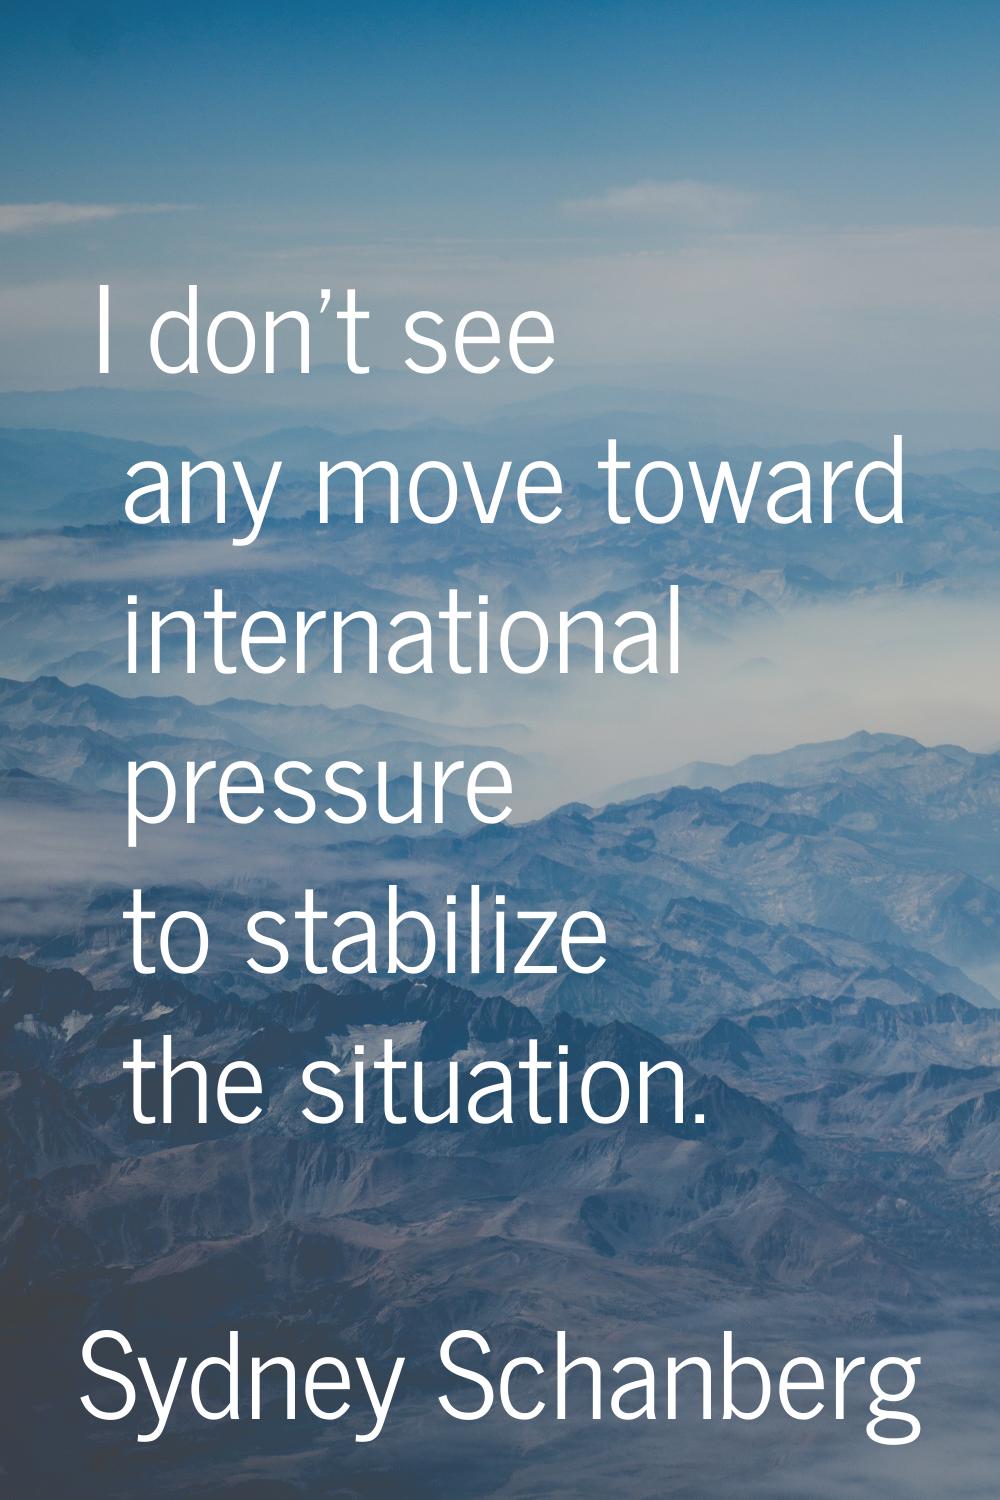 I don't see any move toward international pressure to stabilize the situation.